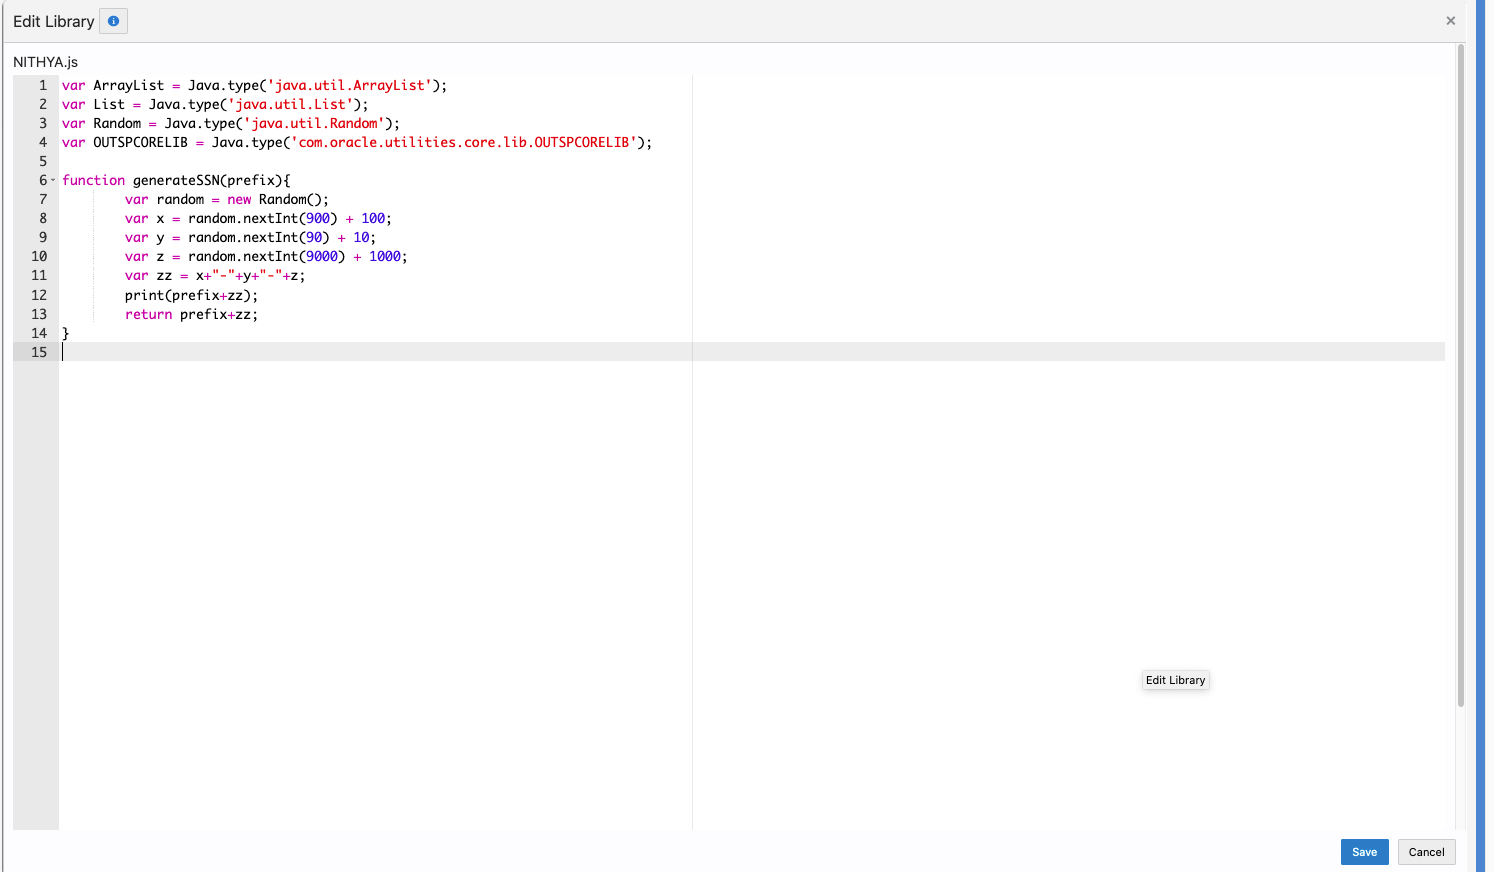 Shows the JavaScript code editor in the application.